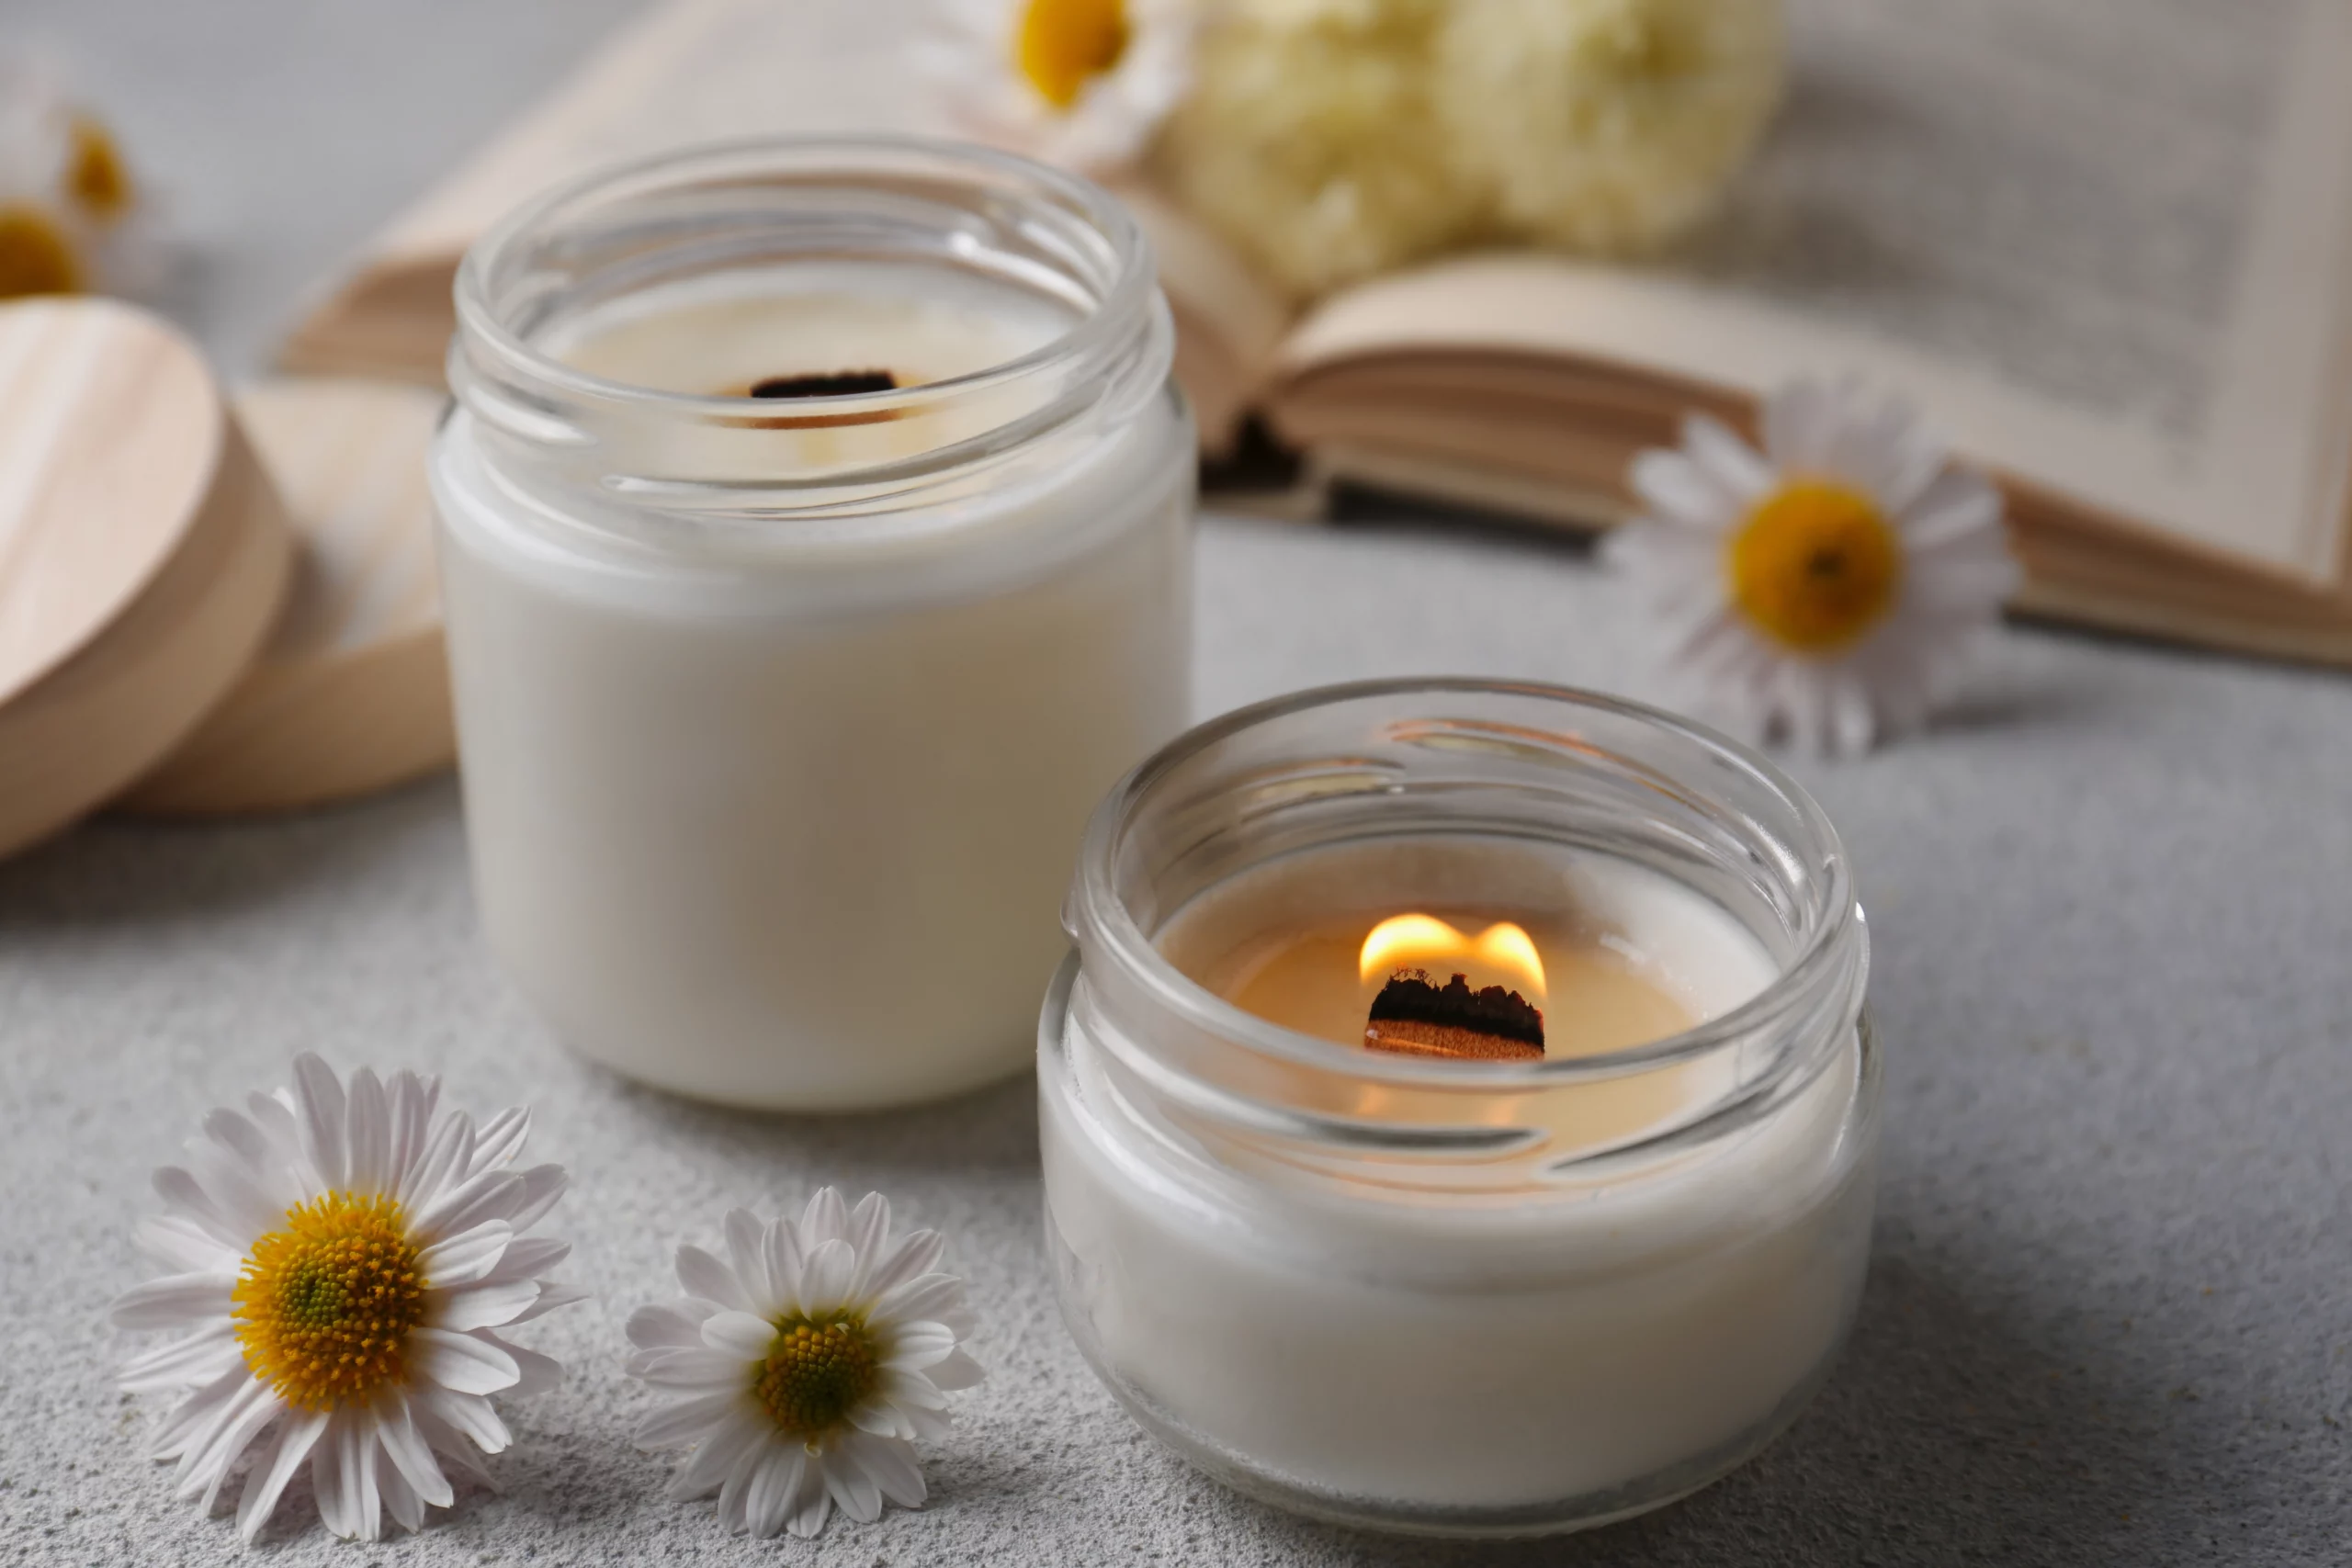 valentines day gift ideas: candles | Swoosh Finance